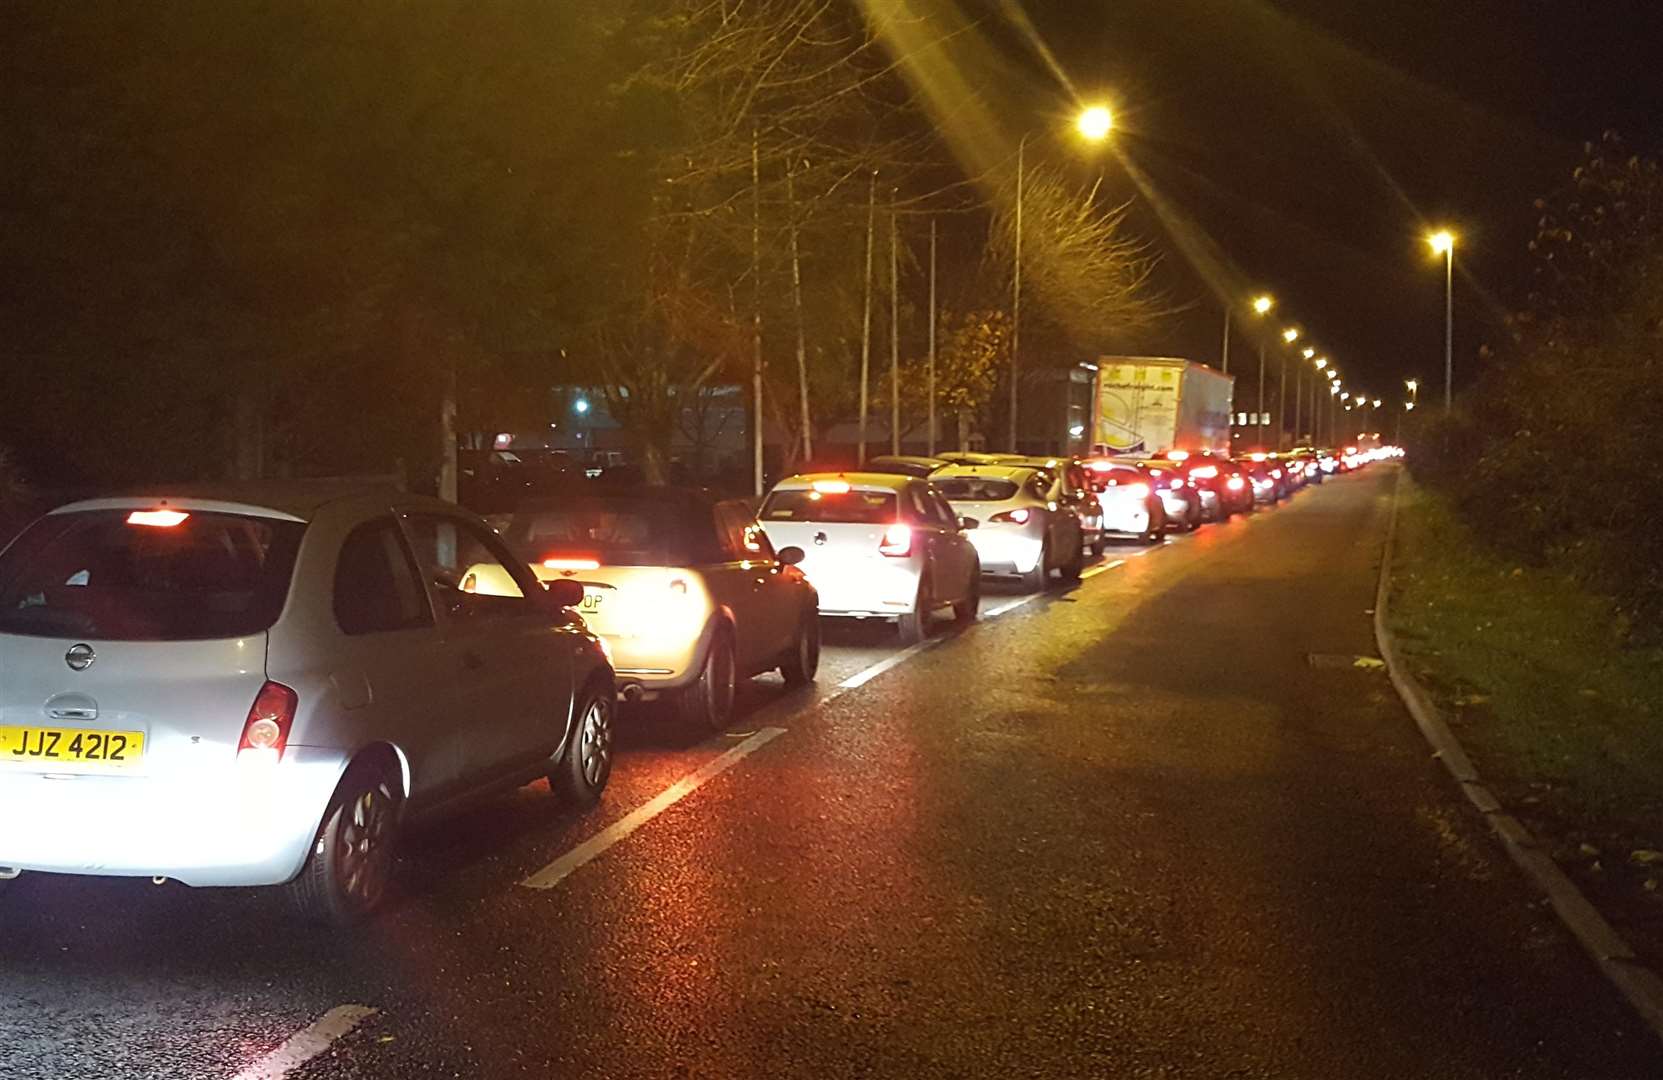 It can take an hour to get off the Medway City Estate during peak times